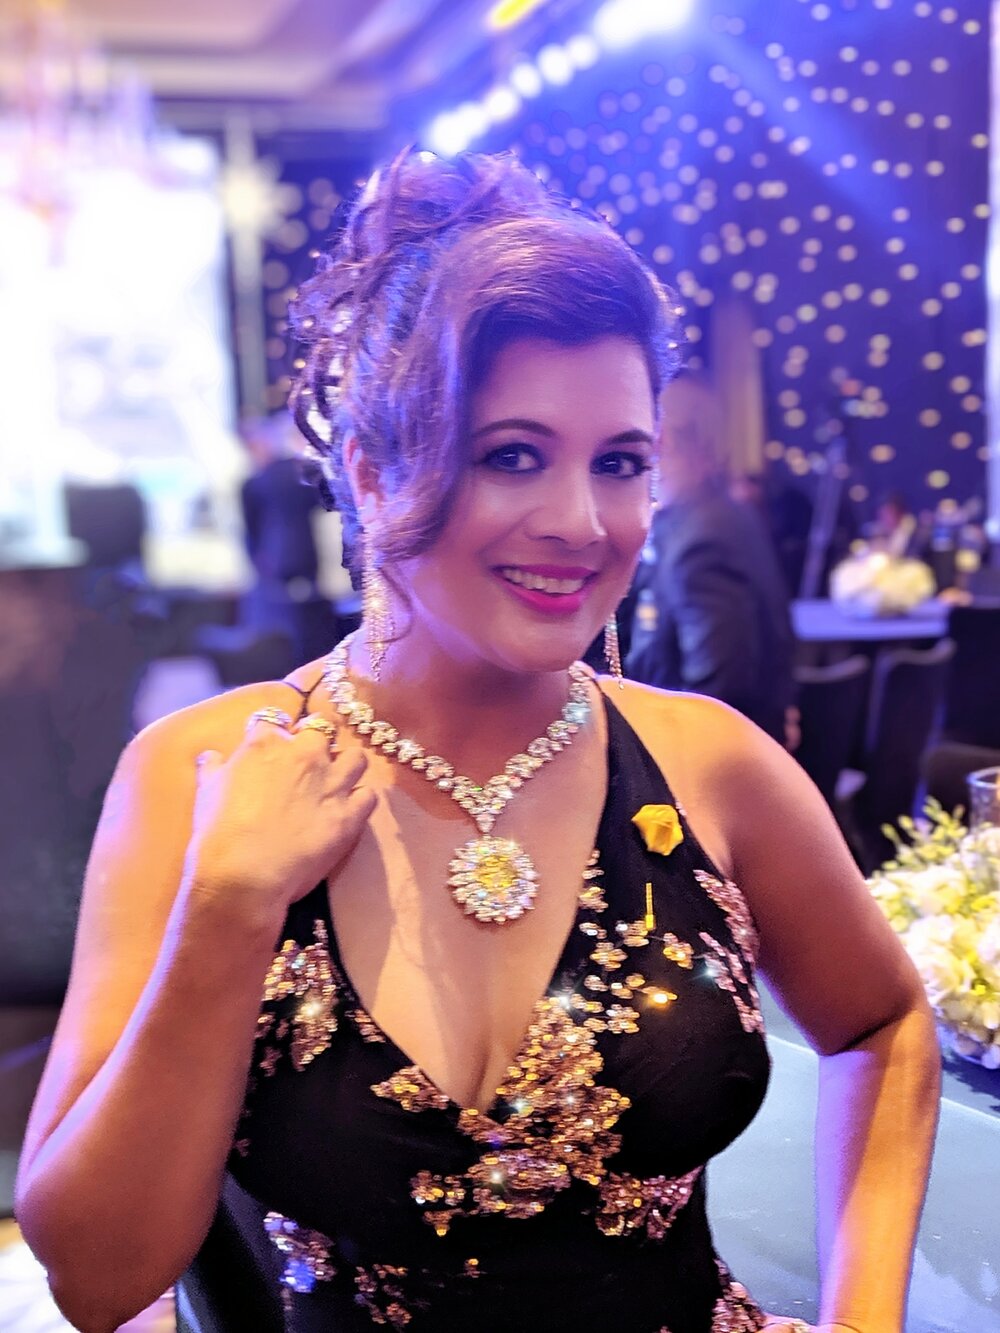  Reena Ahluwalia is wearing the historic Mouawad Dragon yellow diamond necklace. At the Mouawad Simply Exceptional Gala in Bangkok. 